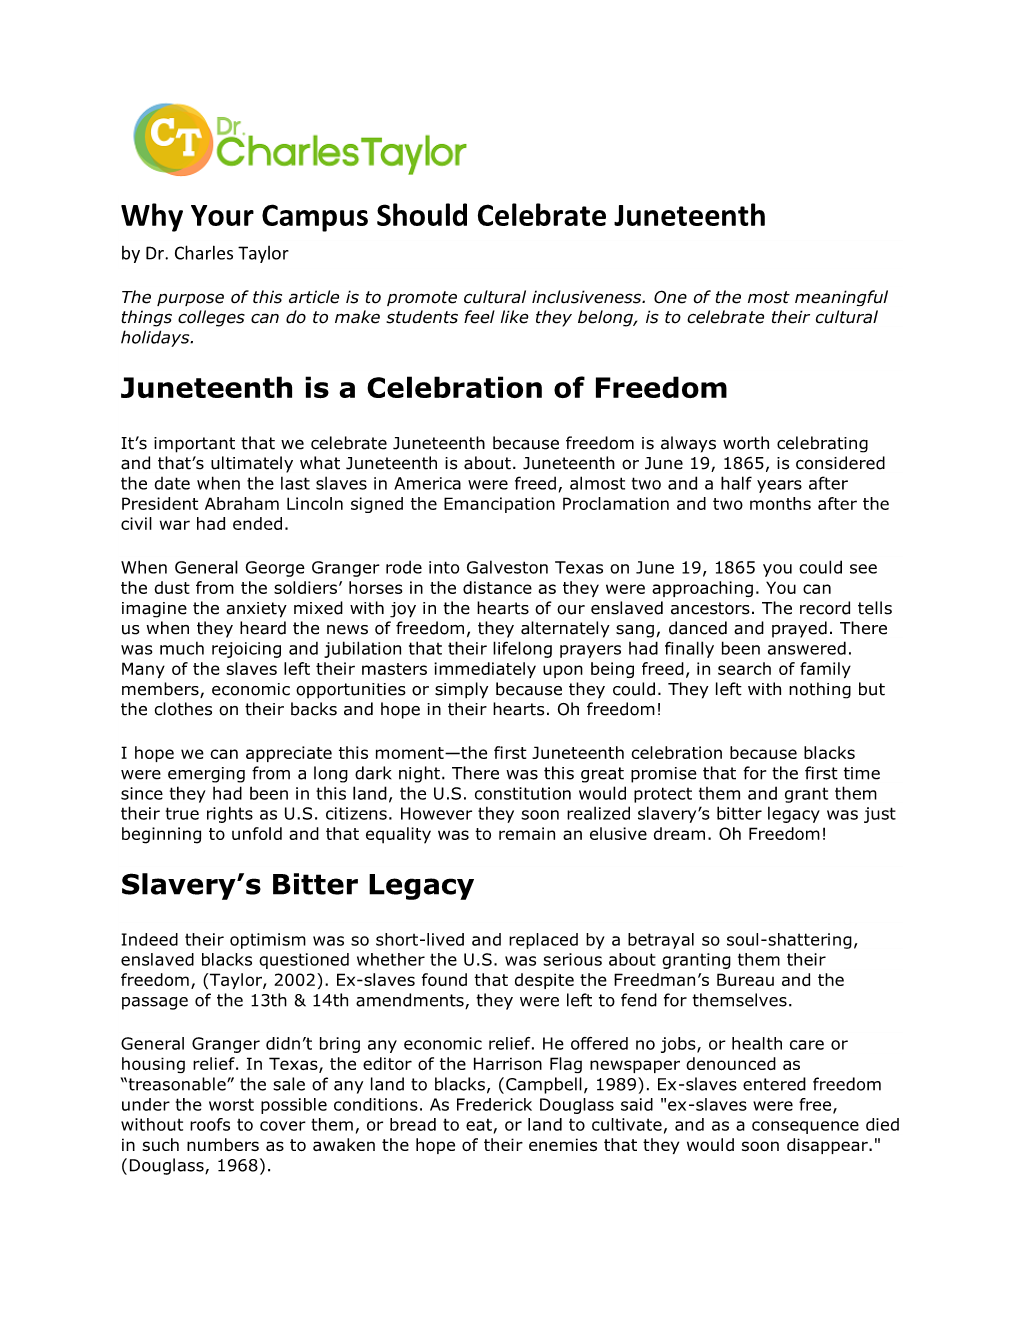 Why Your Campus Should Celebrate Juneteenth by Dr